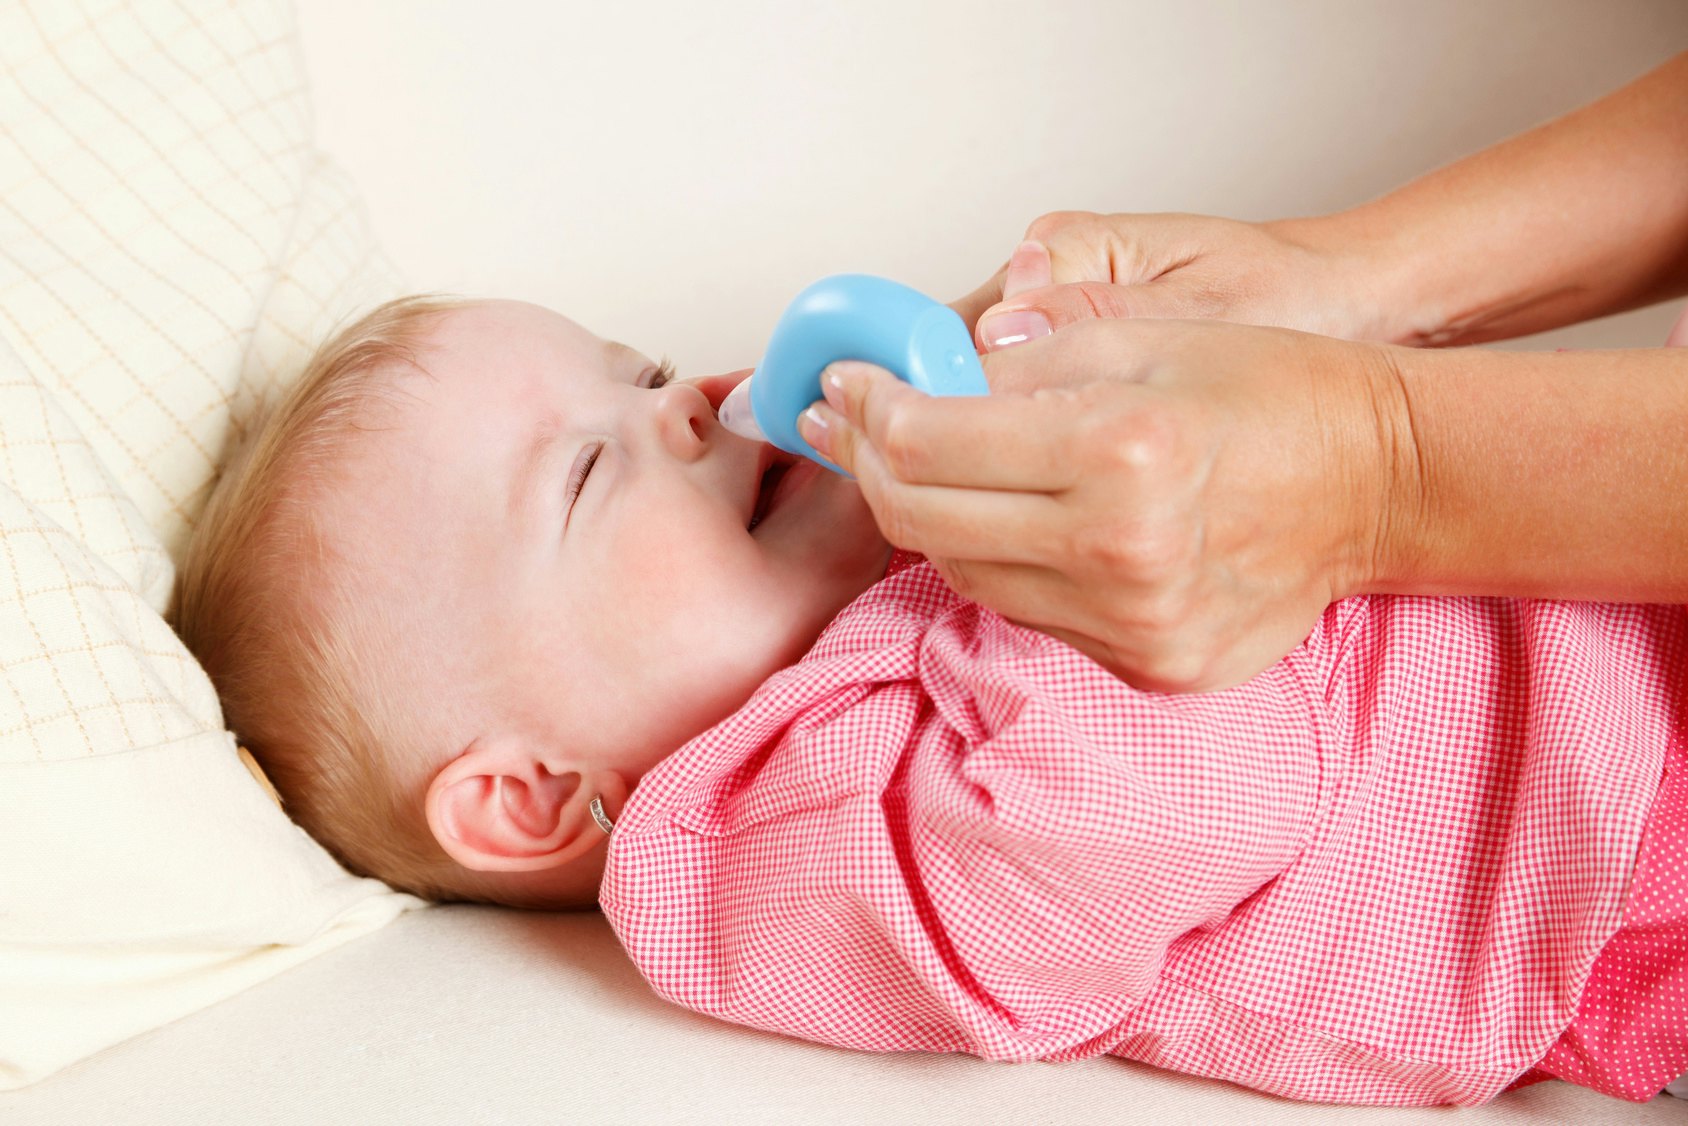 best baby nose suction